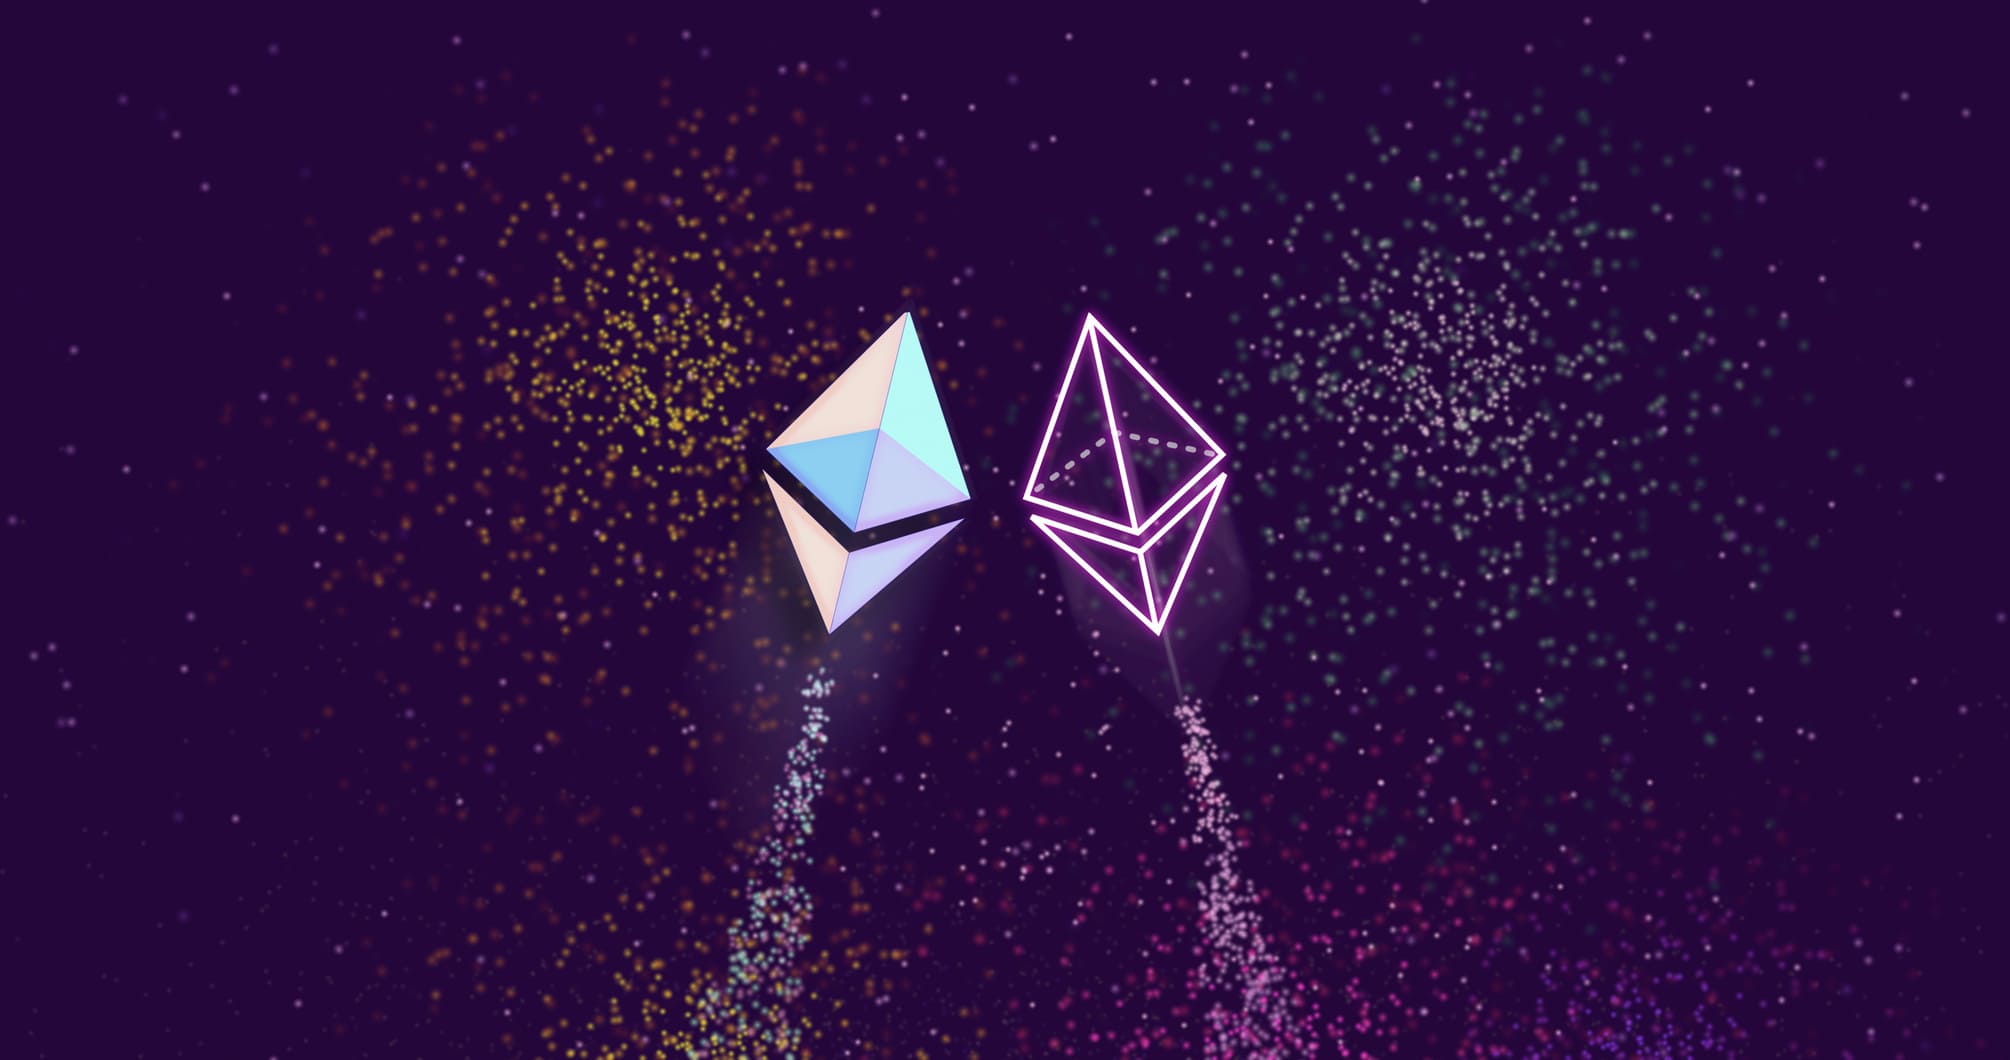 Ethereum’s On-Chain Activity Unchanged in September vs August